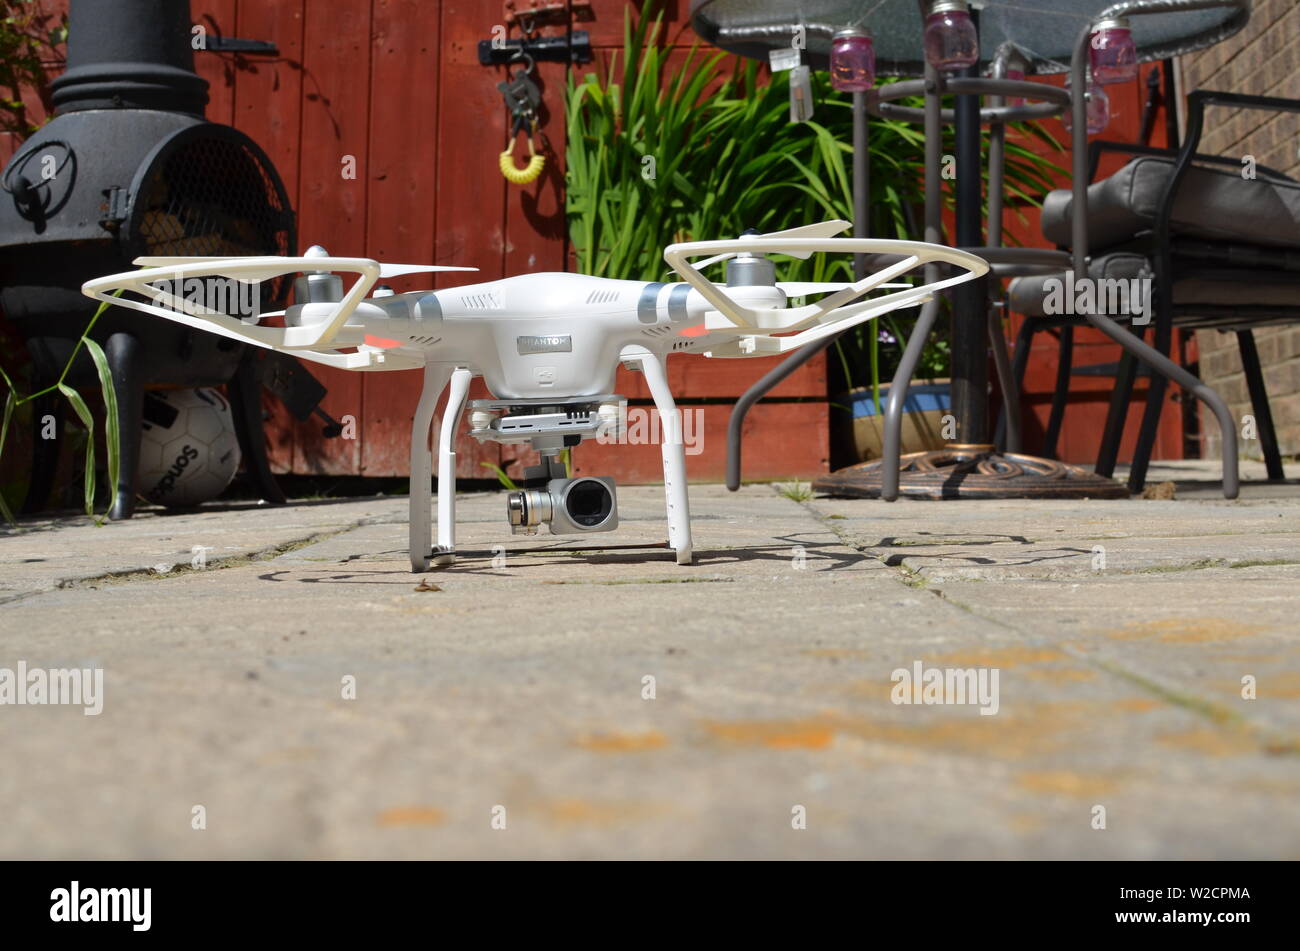 drone, Unmanned aerial vehicle Stock Photo